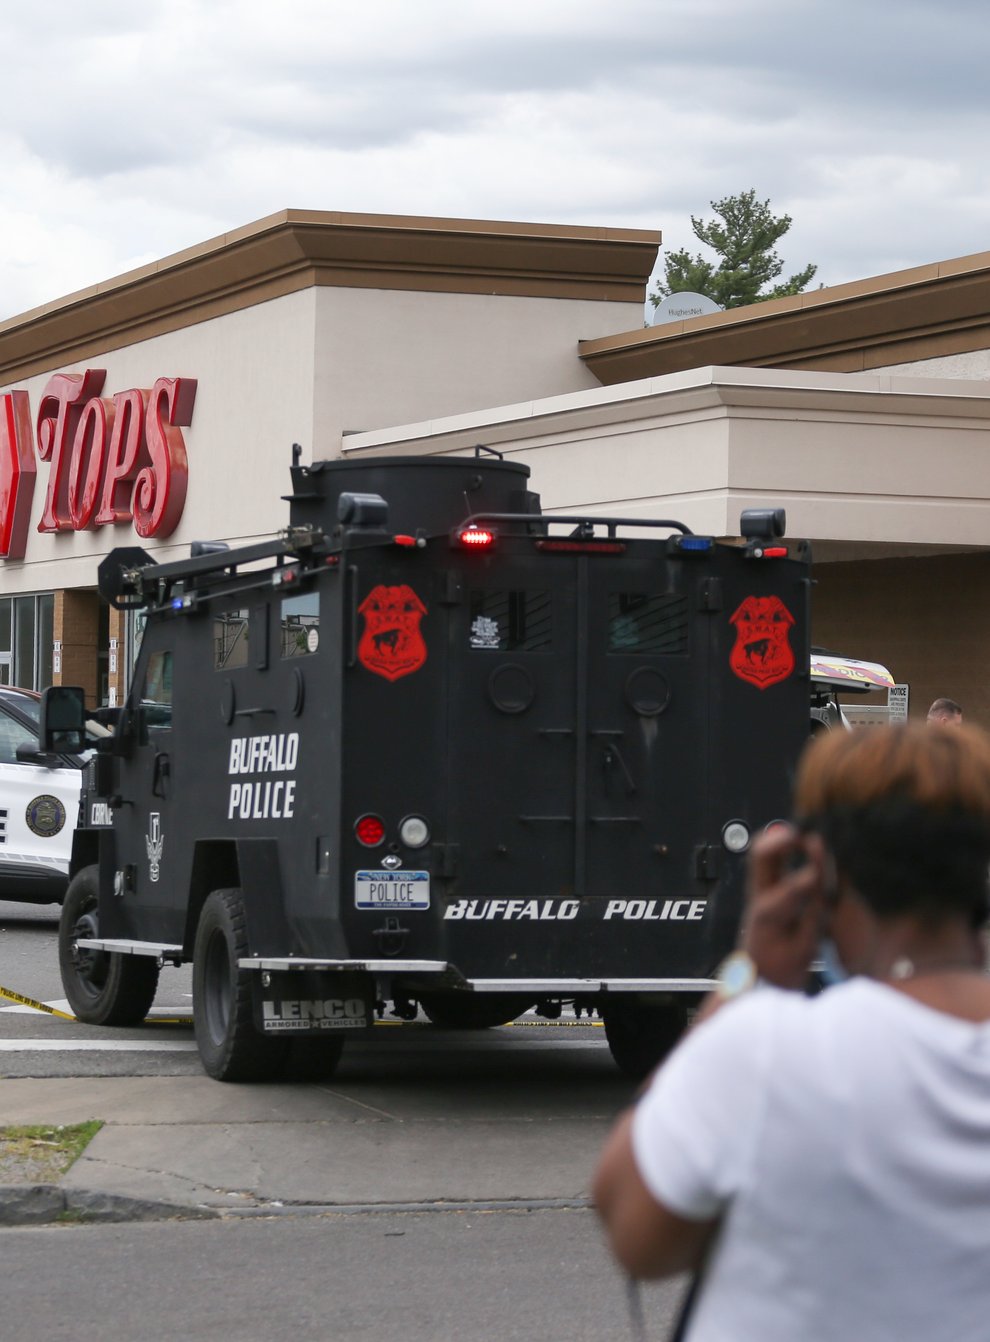 A crowd gathers as police investigate after a shooting at a supermarket in Buffalo (Joshua Bessex/AP)